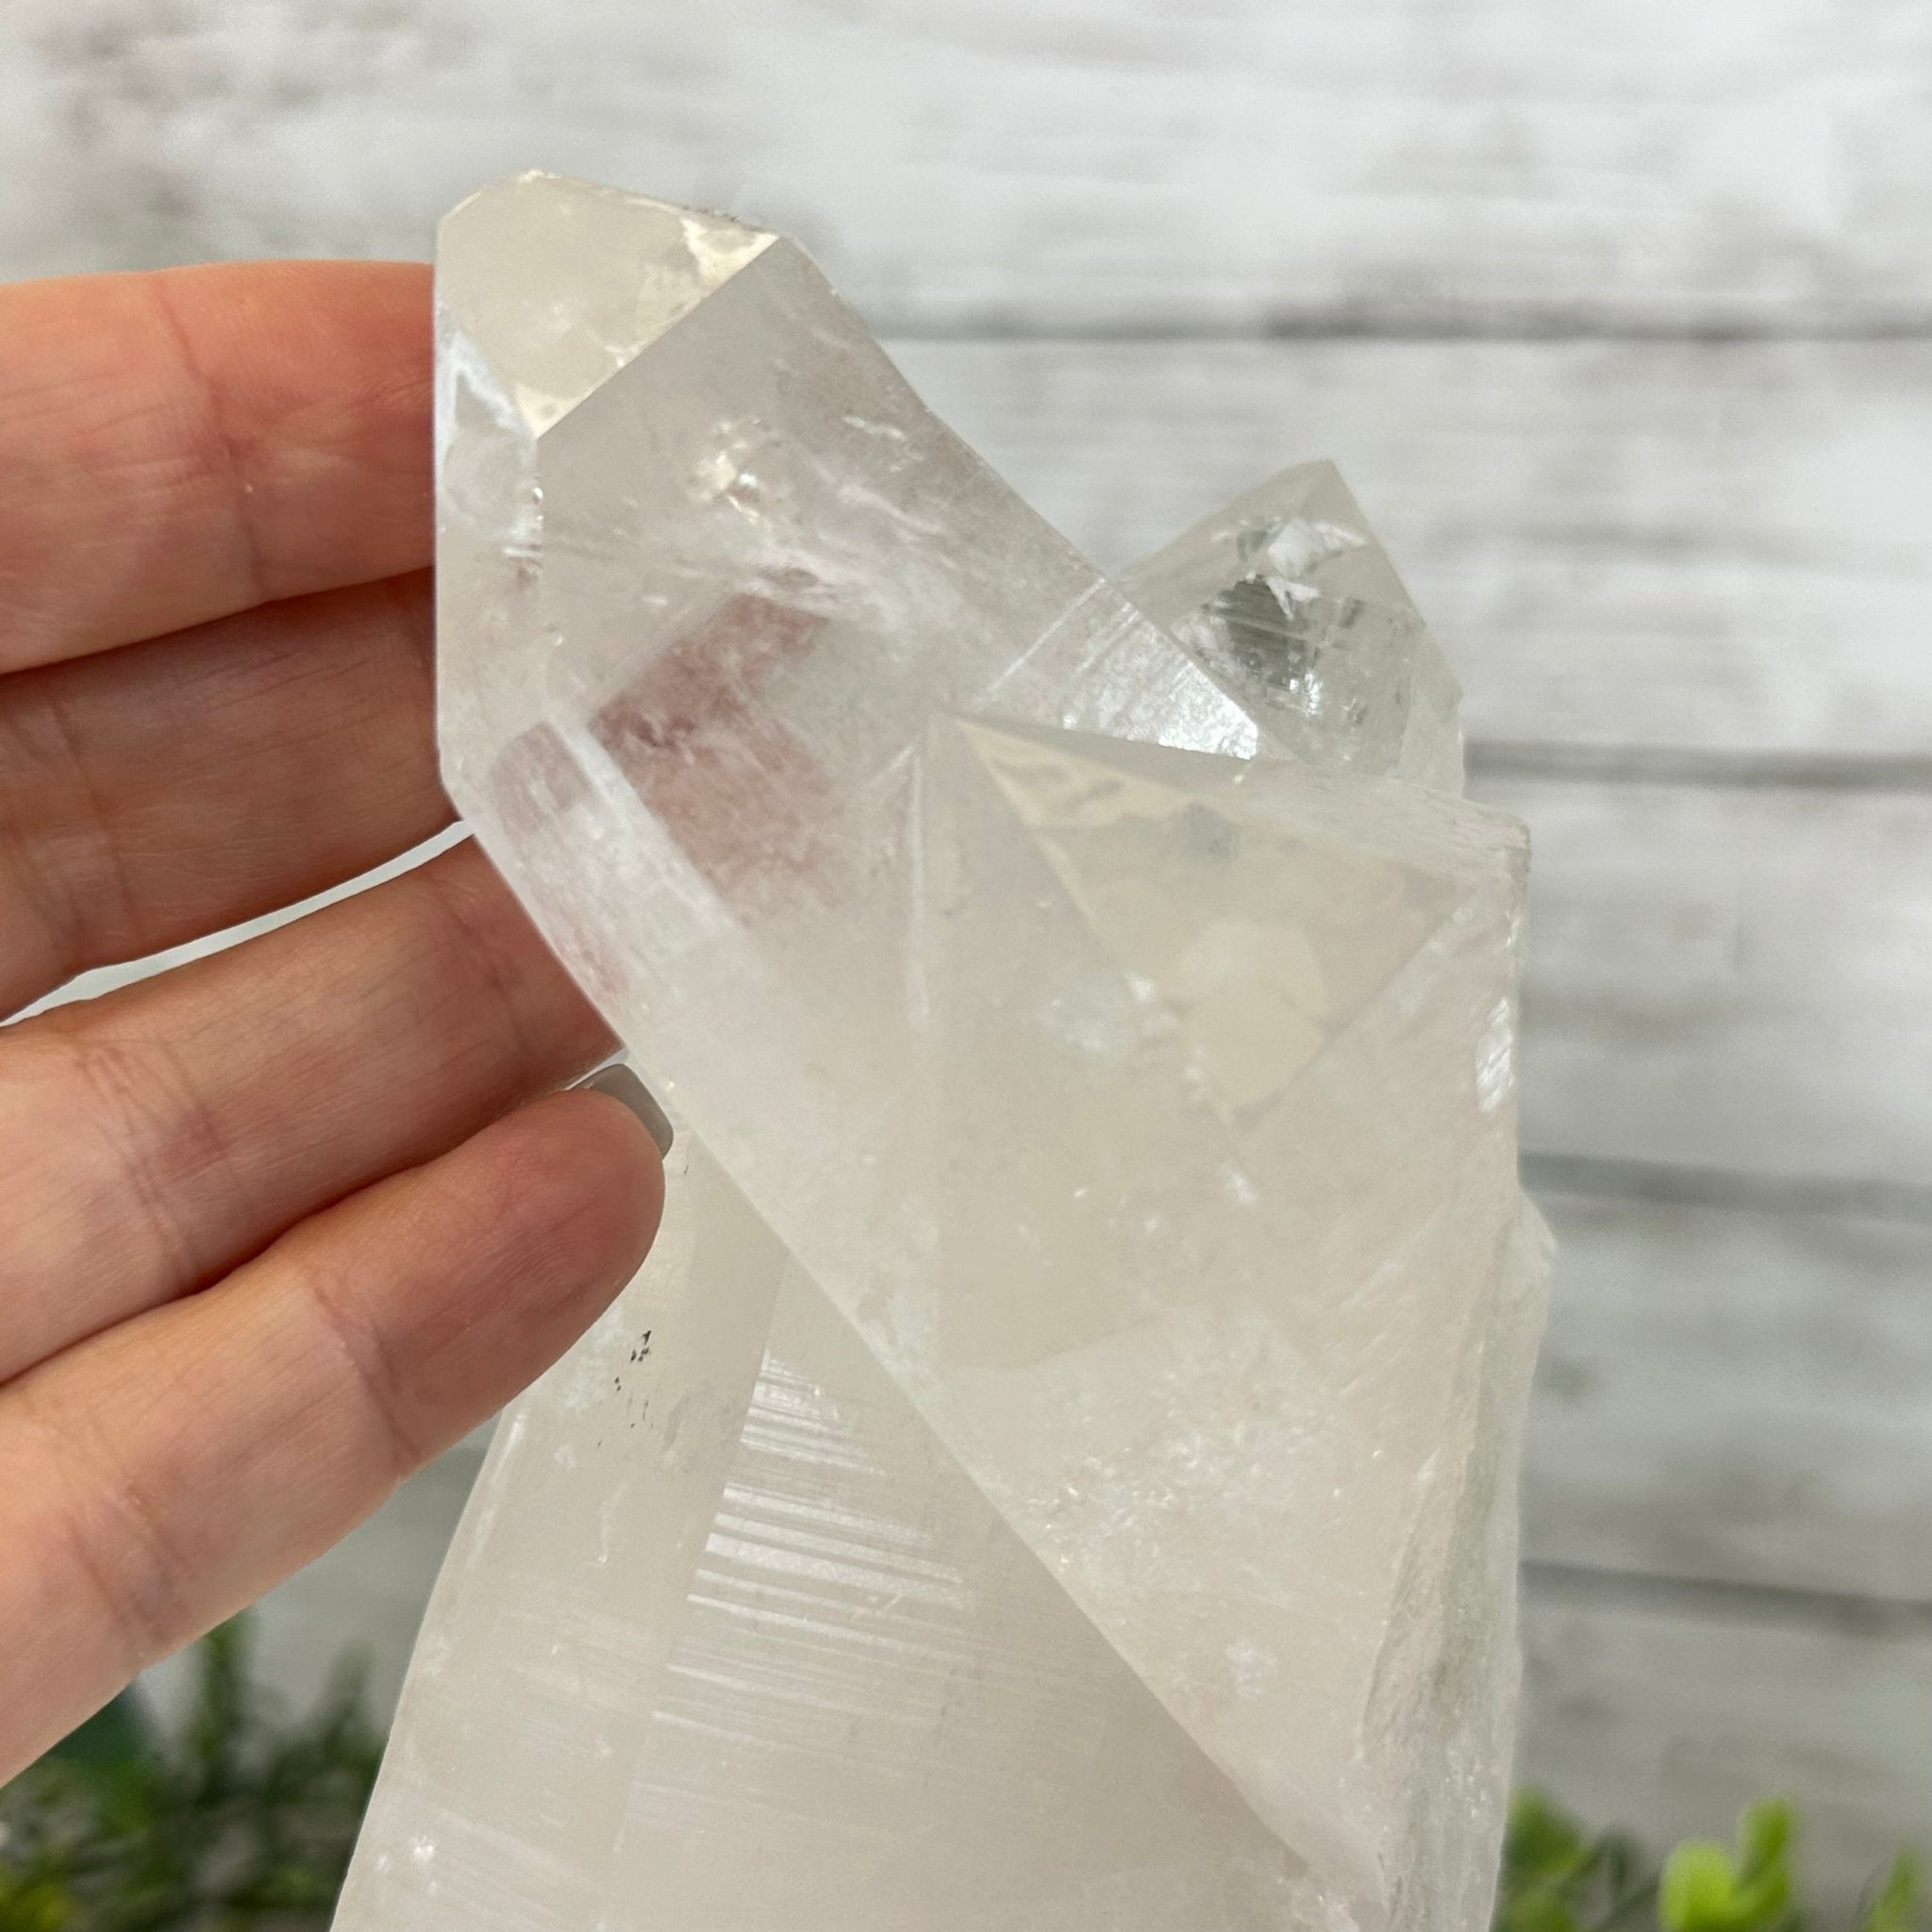 Clear Quartz Crystal Point on Fixed Base, 4.2 lbs & 8.9" Tall #3122CQ-007 - Brazil GemsBrazil GemsClear Quartz Crystal Point on Fixed Base, 4.2 lbs & 8.9" Tall #3122CQ-007Crystal Points3122CQ-007